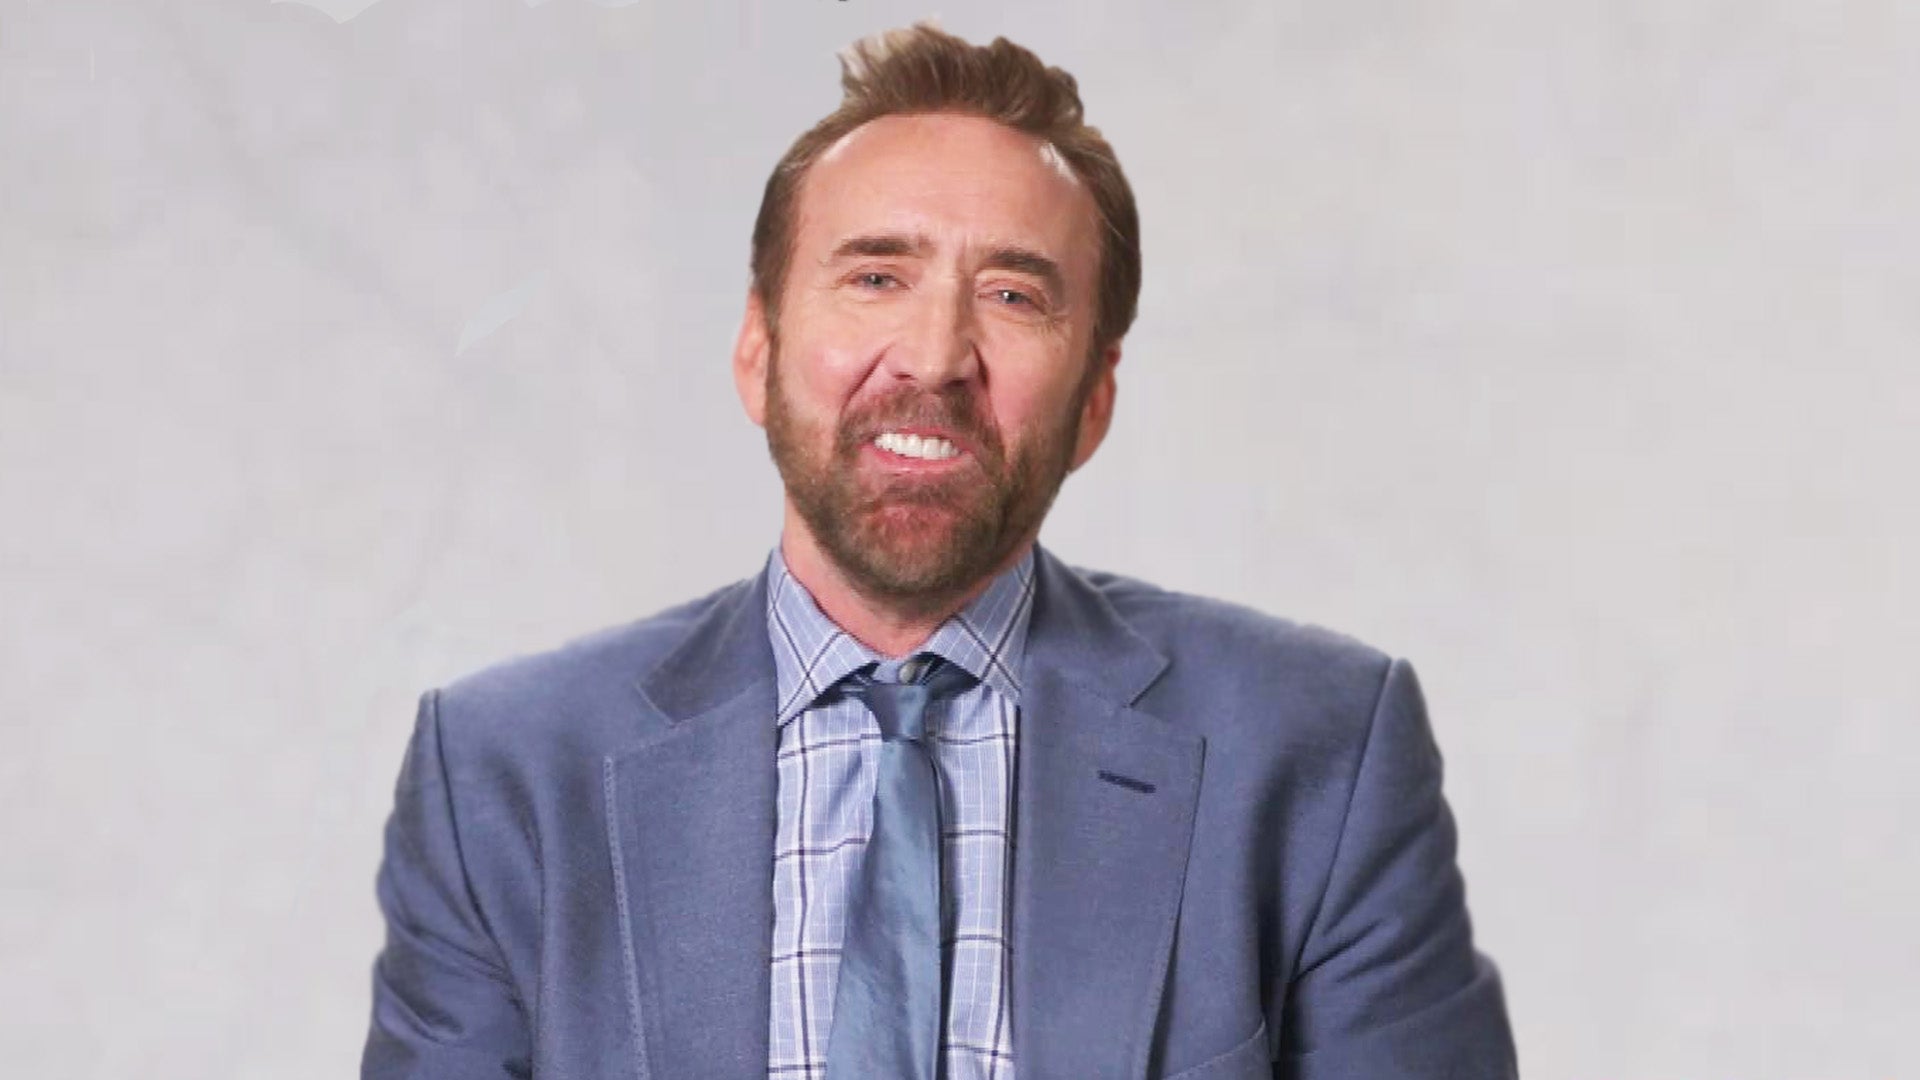 ‘Dream Scenario’: Nicolas Cage on Why He Wants to Step Back From Making Movies (Exclusive)